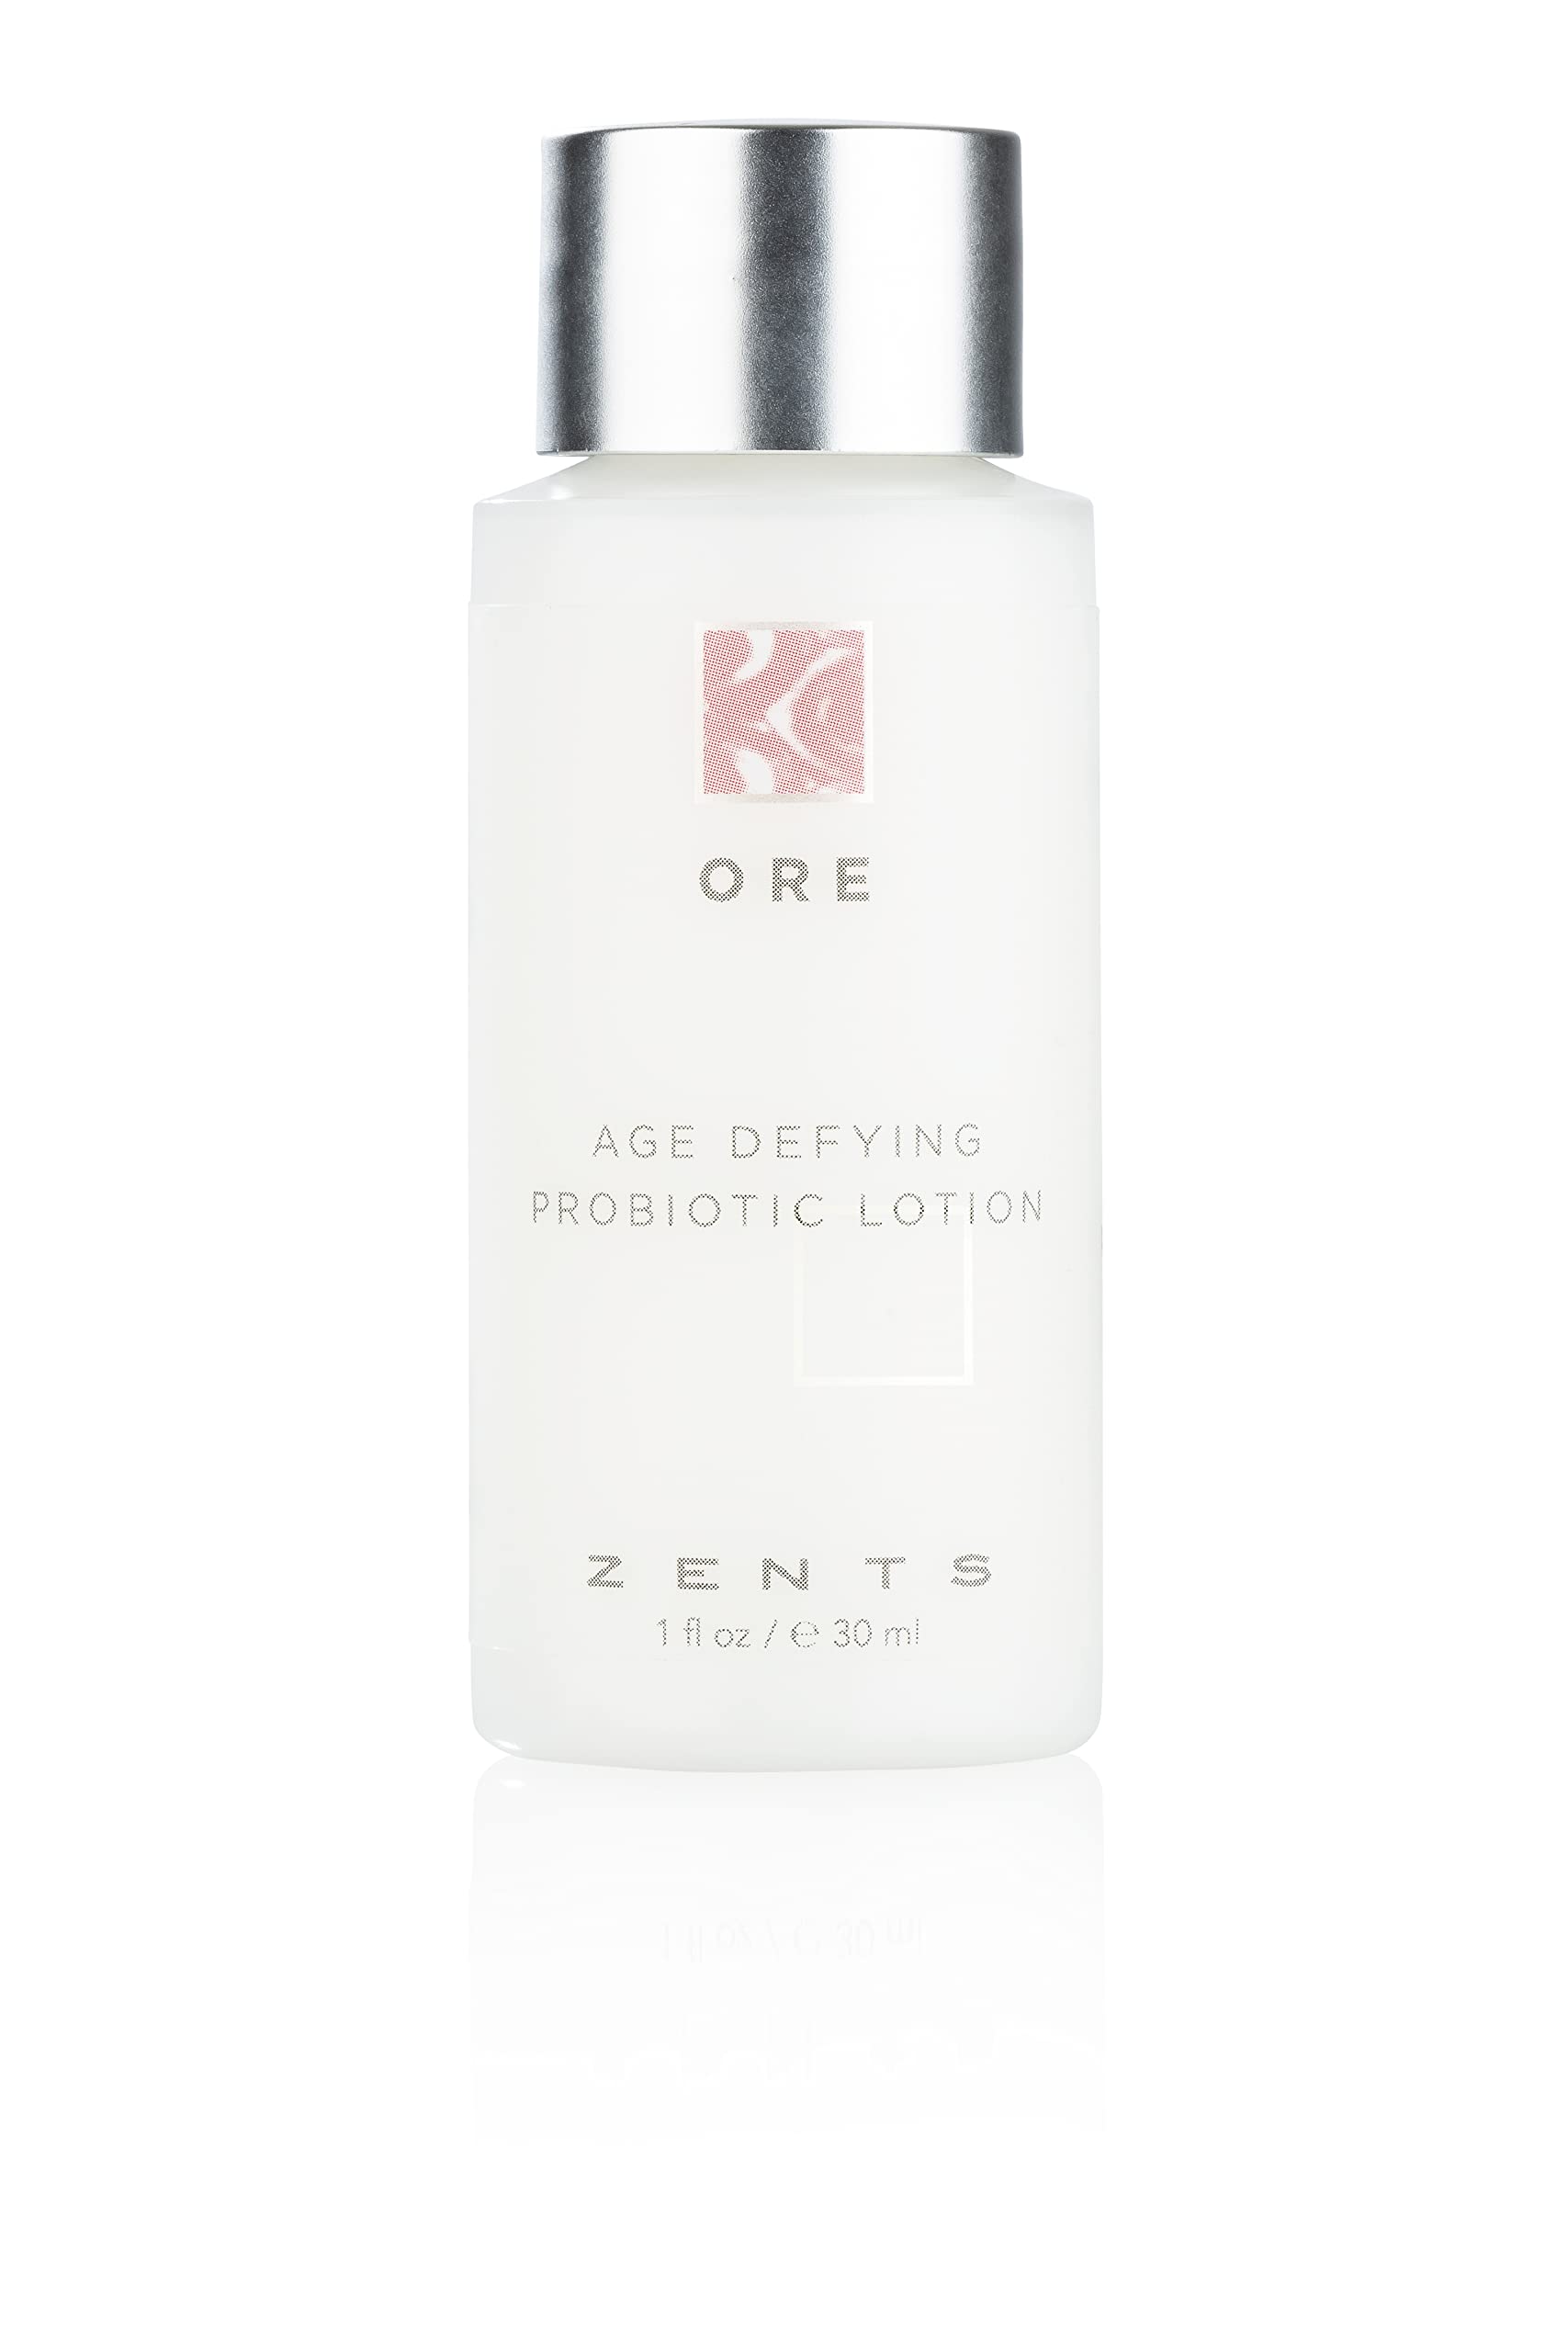 Zents Age Defying Mini Probiotic Lotion (Ore Fragrance) Anti-Aging Body and Hand Cream with Organic Shea Butter & Hyaluronic Acid, 1 fl oz, TSA Approved Travel Size